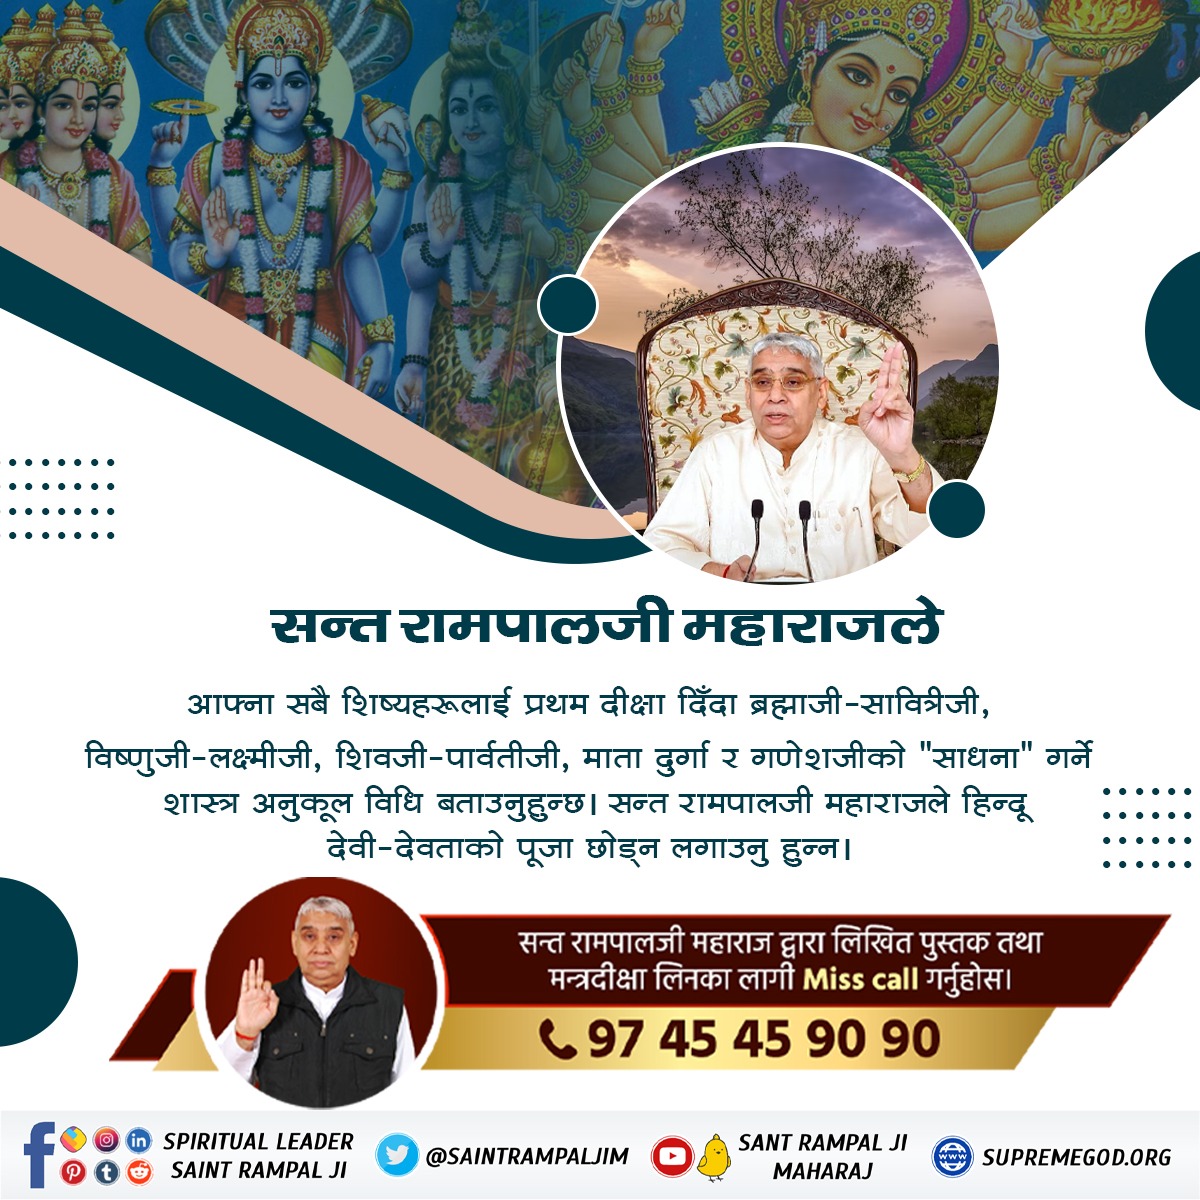 #तिनै_देवता_कमलमा Hanuman ji got the result of his selfless help to the distressed. Kabir God himself came and told him the right path of salvation.